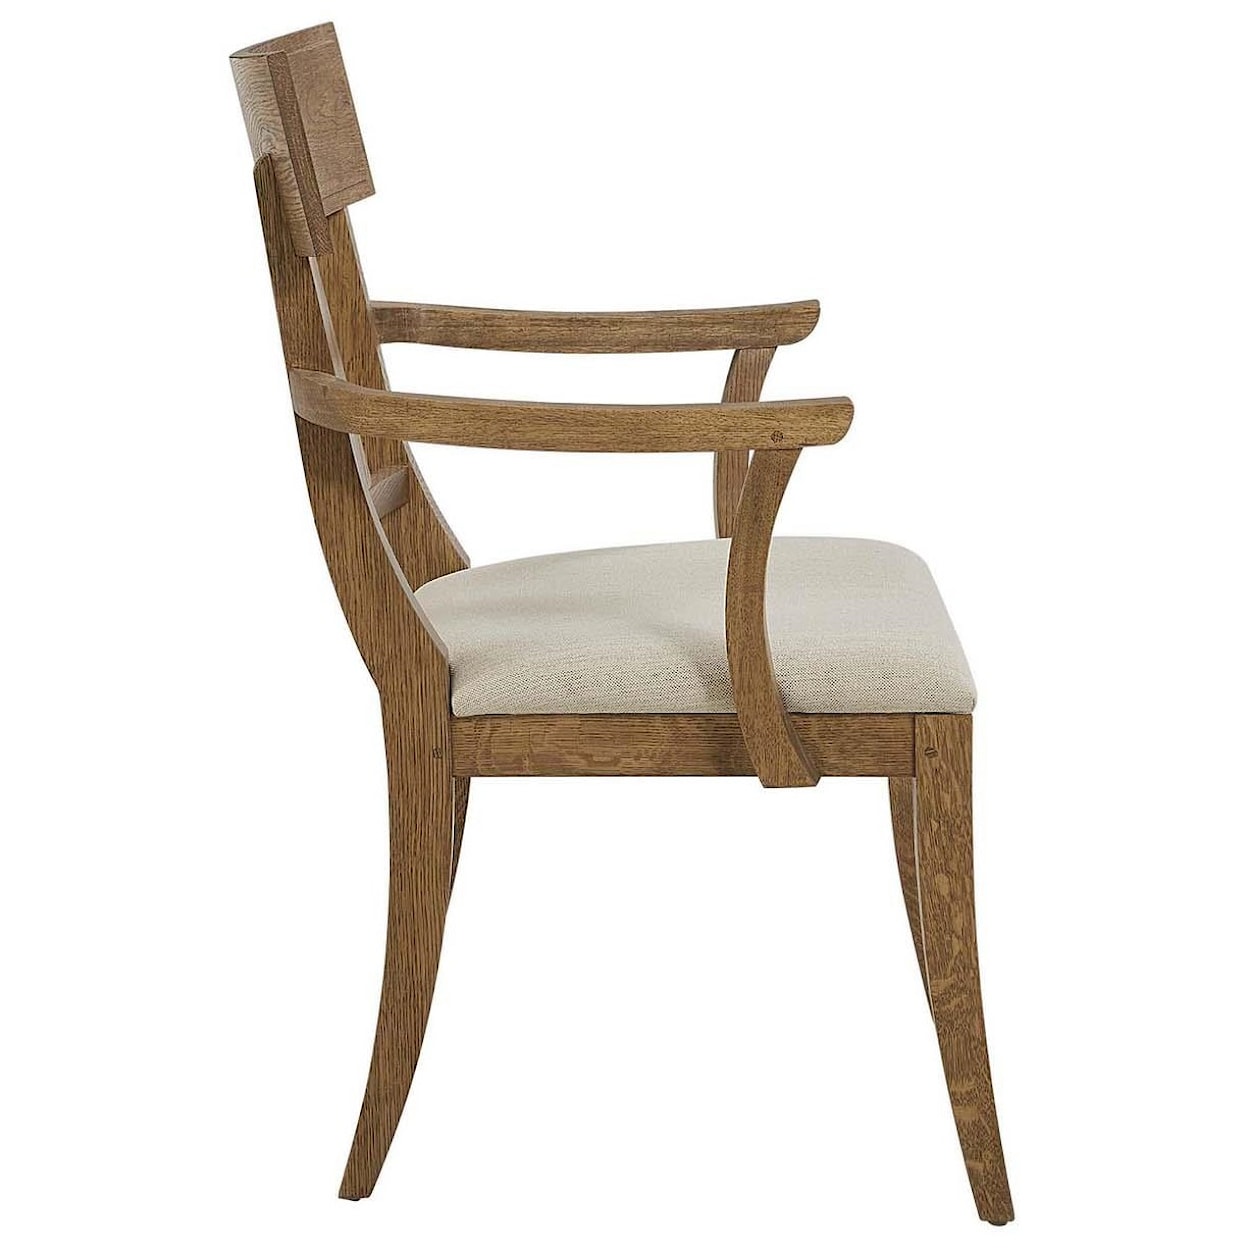 Stickley St. Lawrence St. Lawrence Fabric Arm Chair